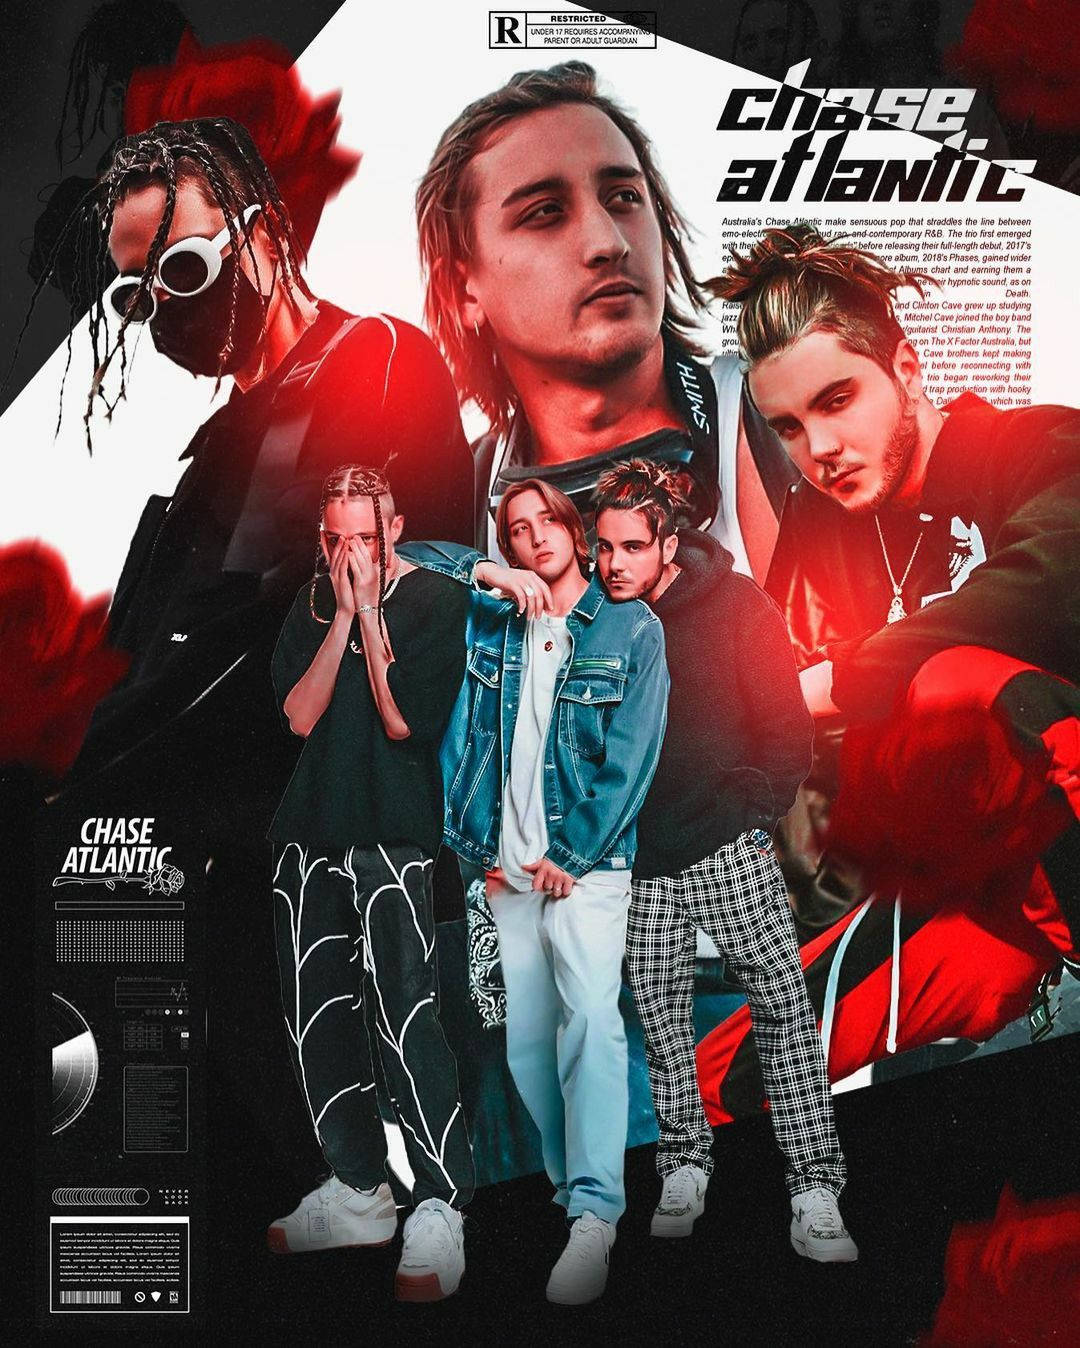 "Catch the adventure with Chase Atlantic" Wallpaper